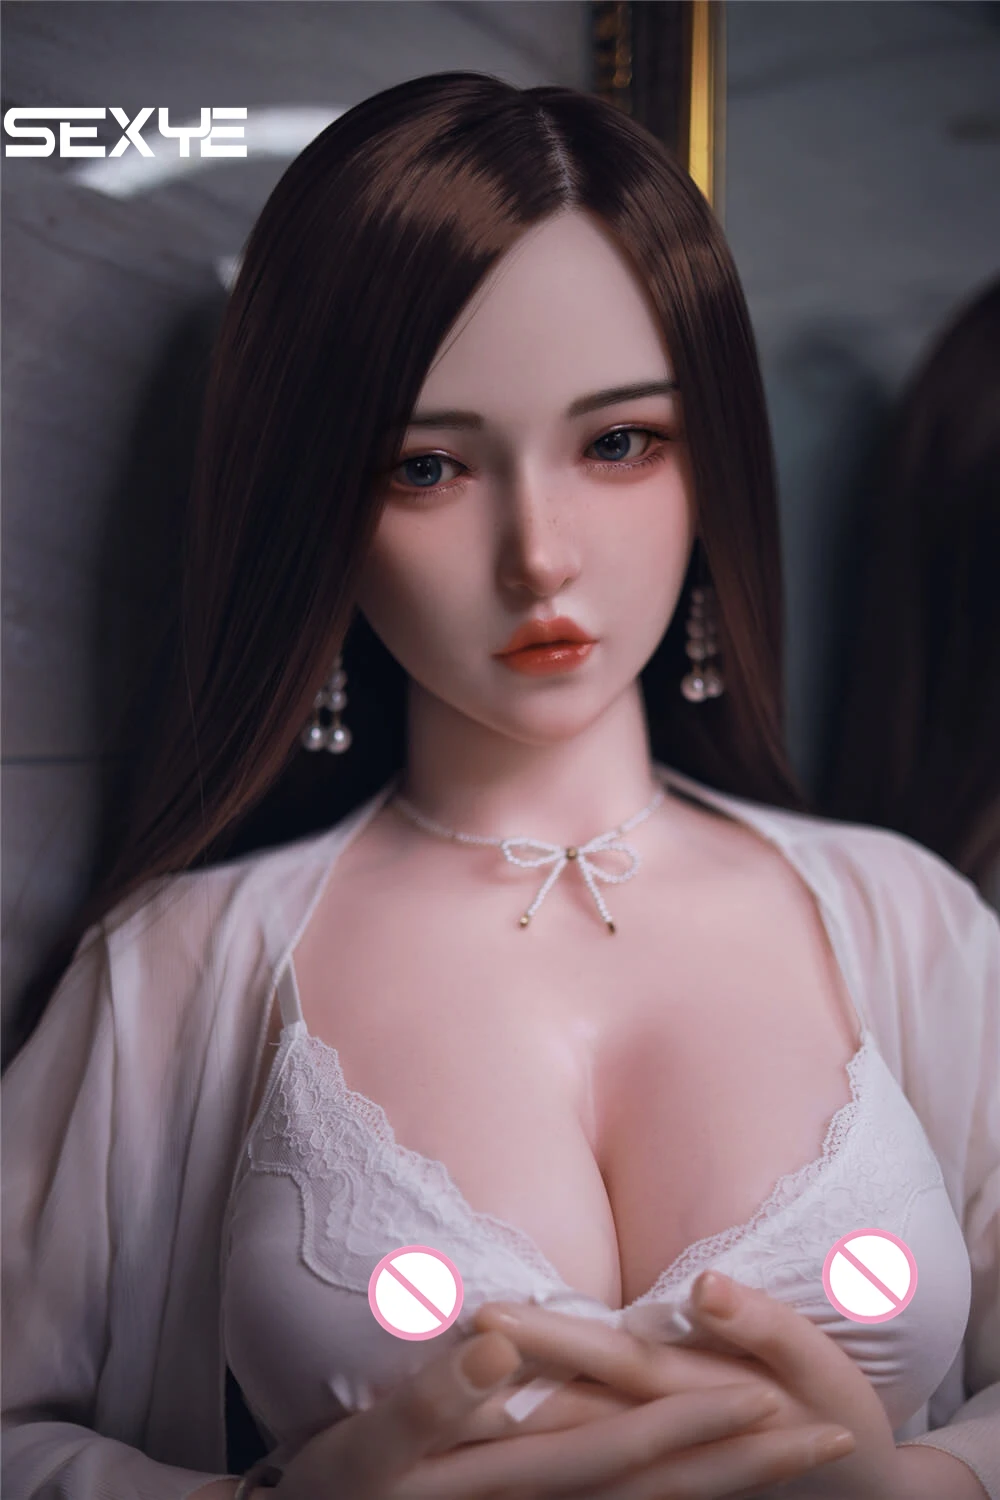 Full-Body-Sex-Toys-for-Men-Sesualex-Anime-Dolls-for-Adults-18-Real-Size-Realistic-Vagina.jpg